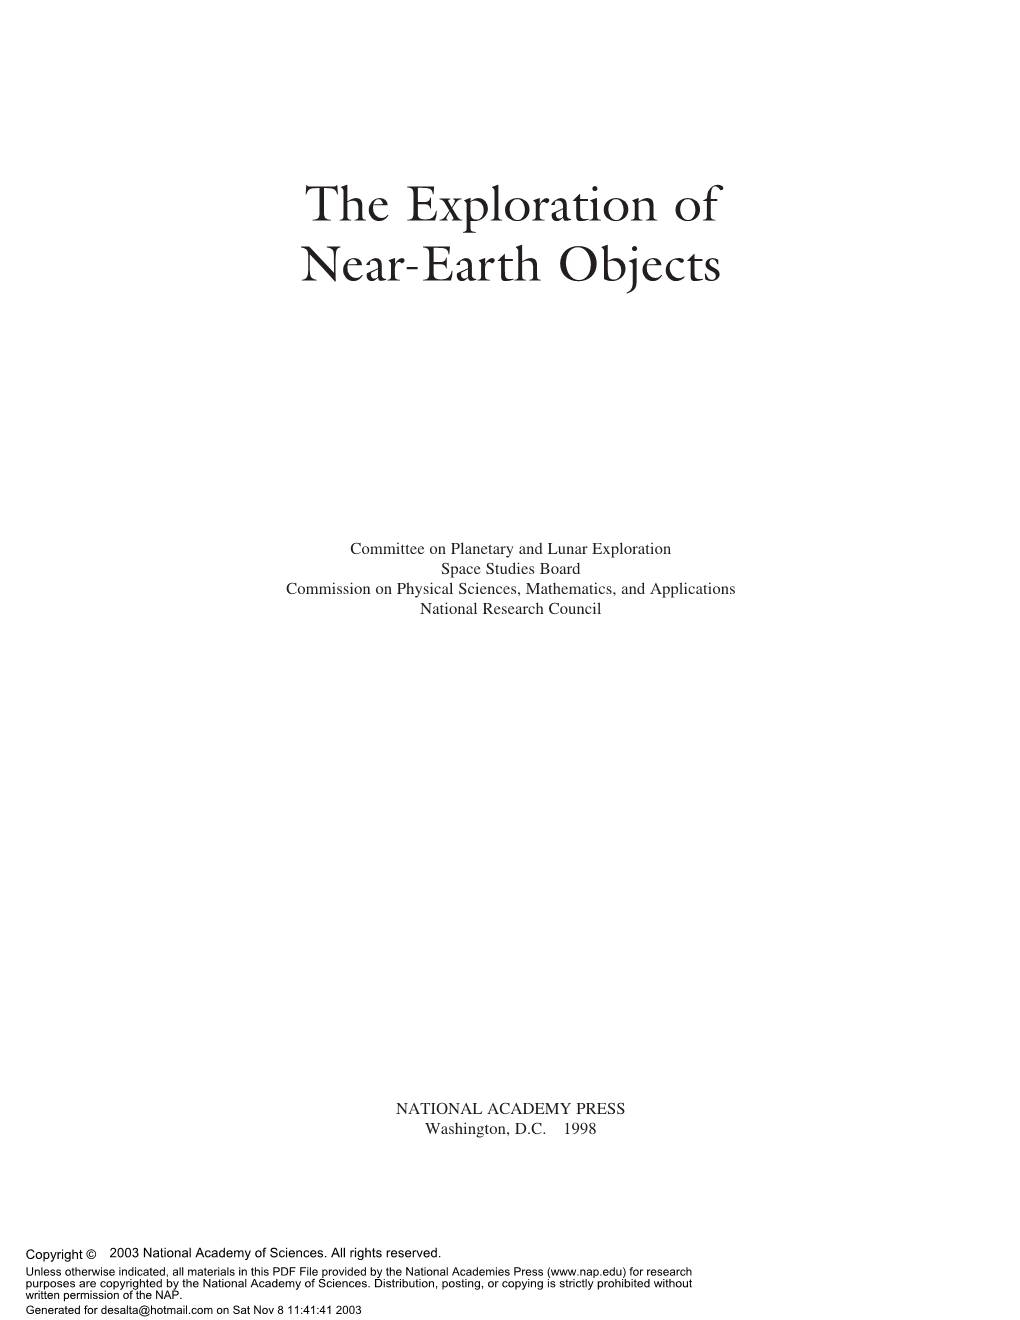 The Exploration of Near-Earth Objects